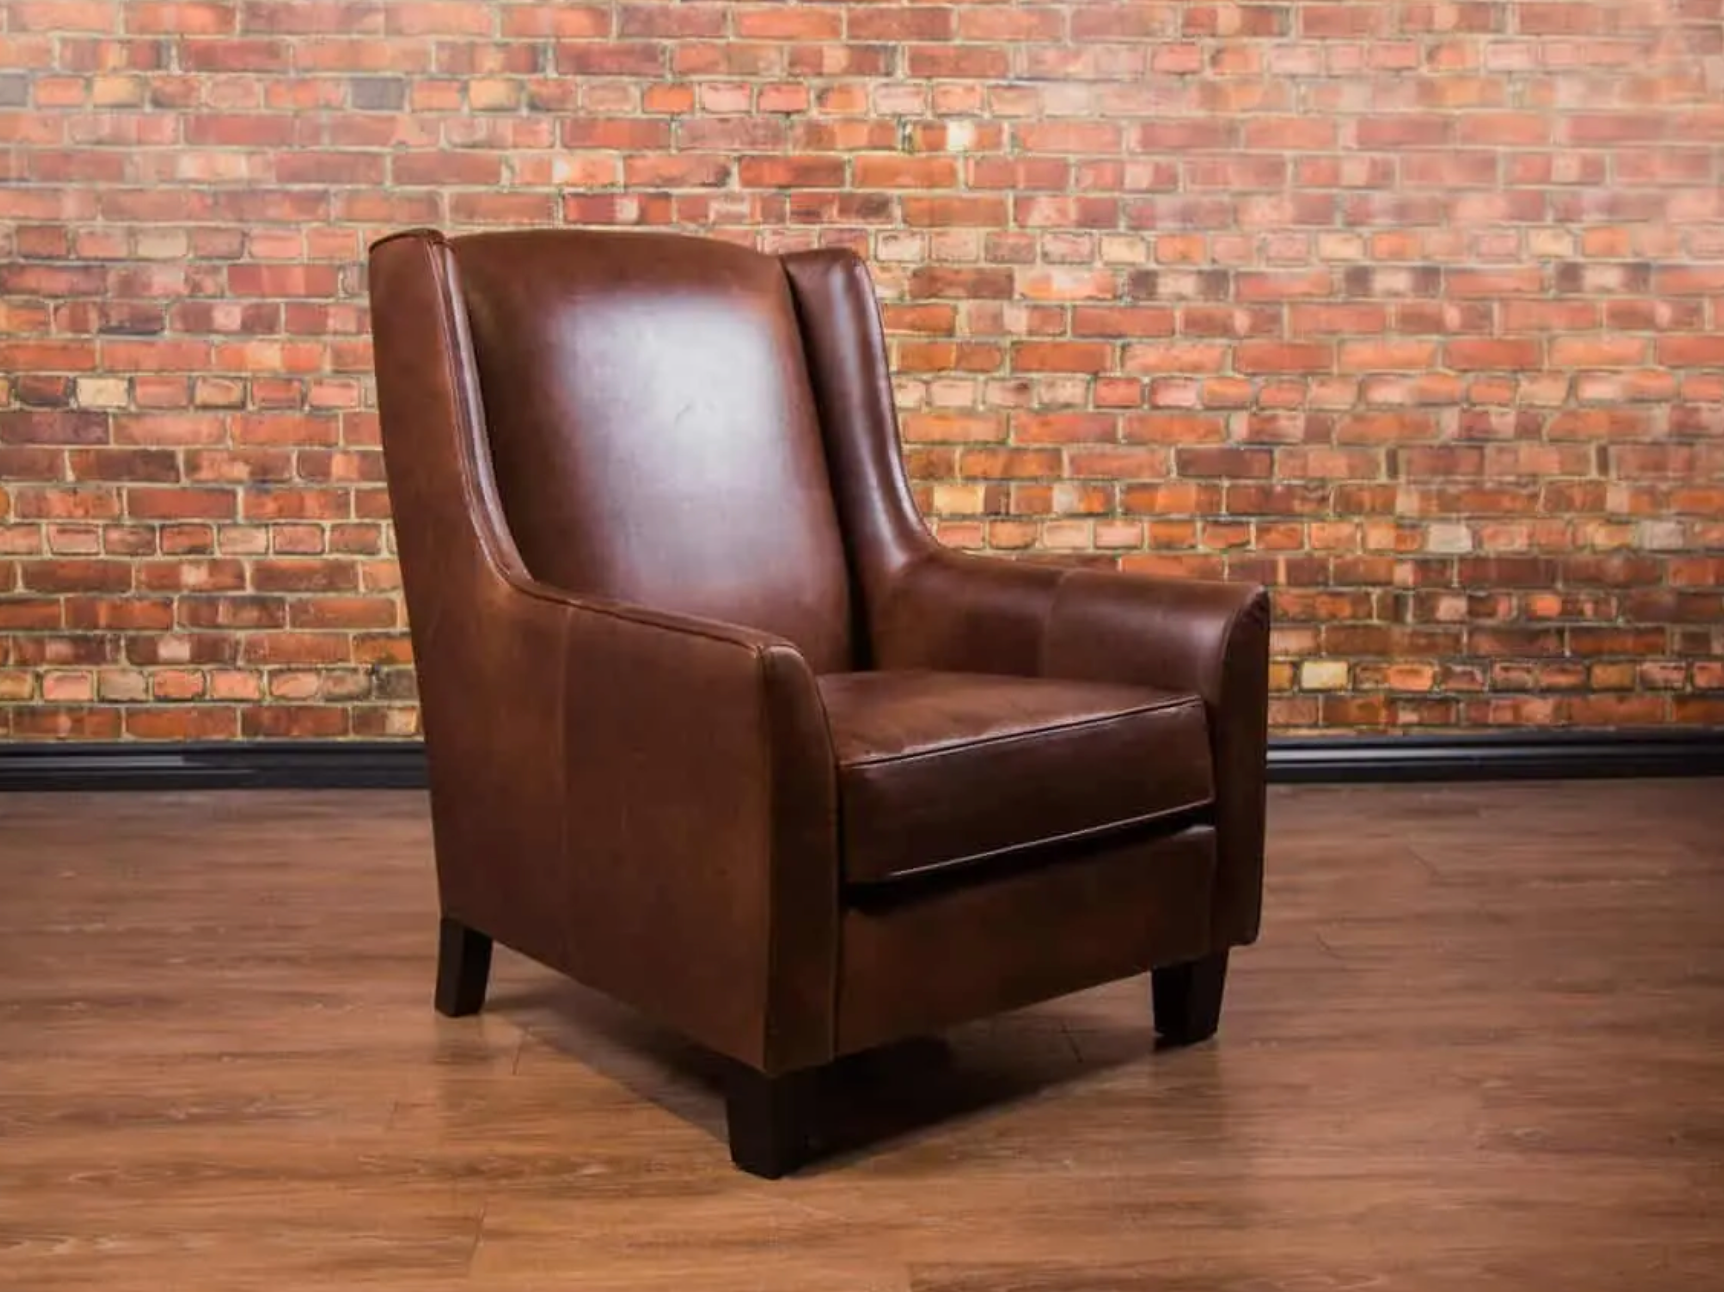 EMERSON LEATHER CHAIR